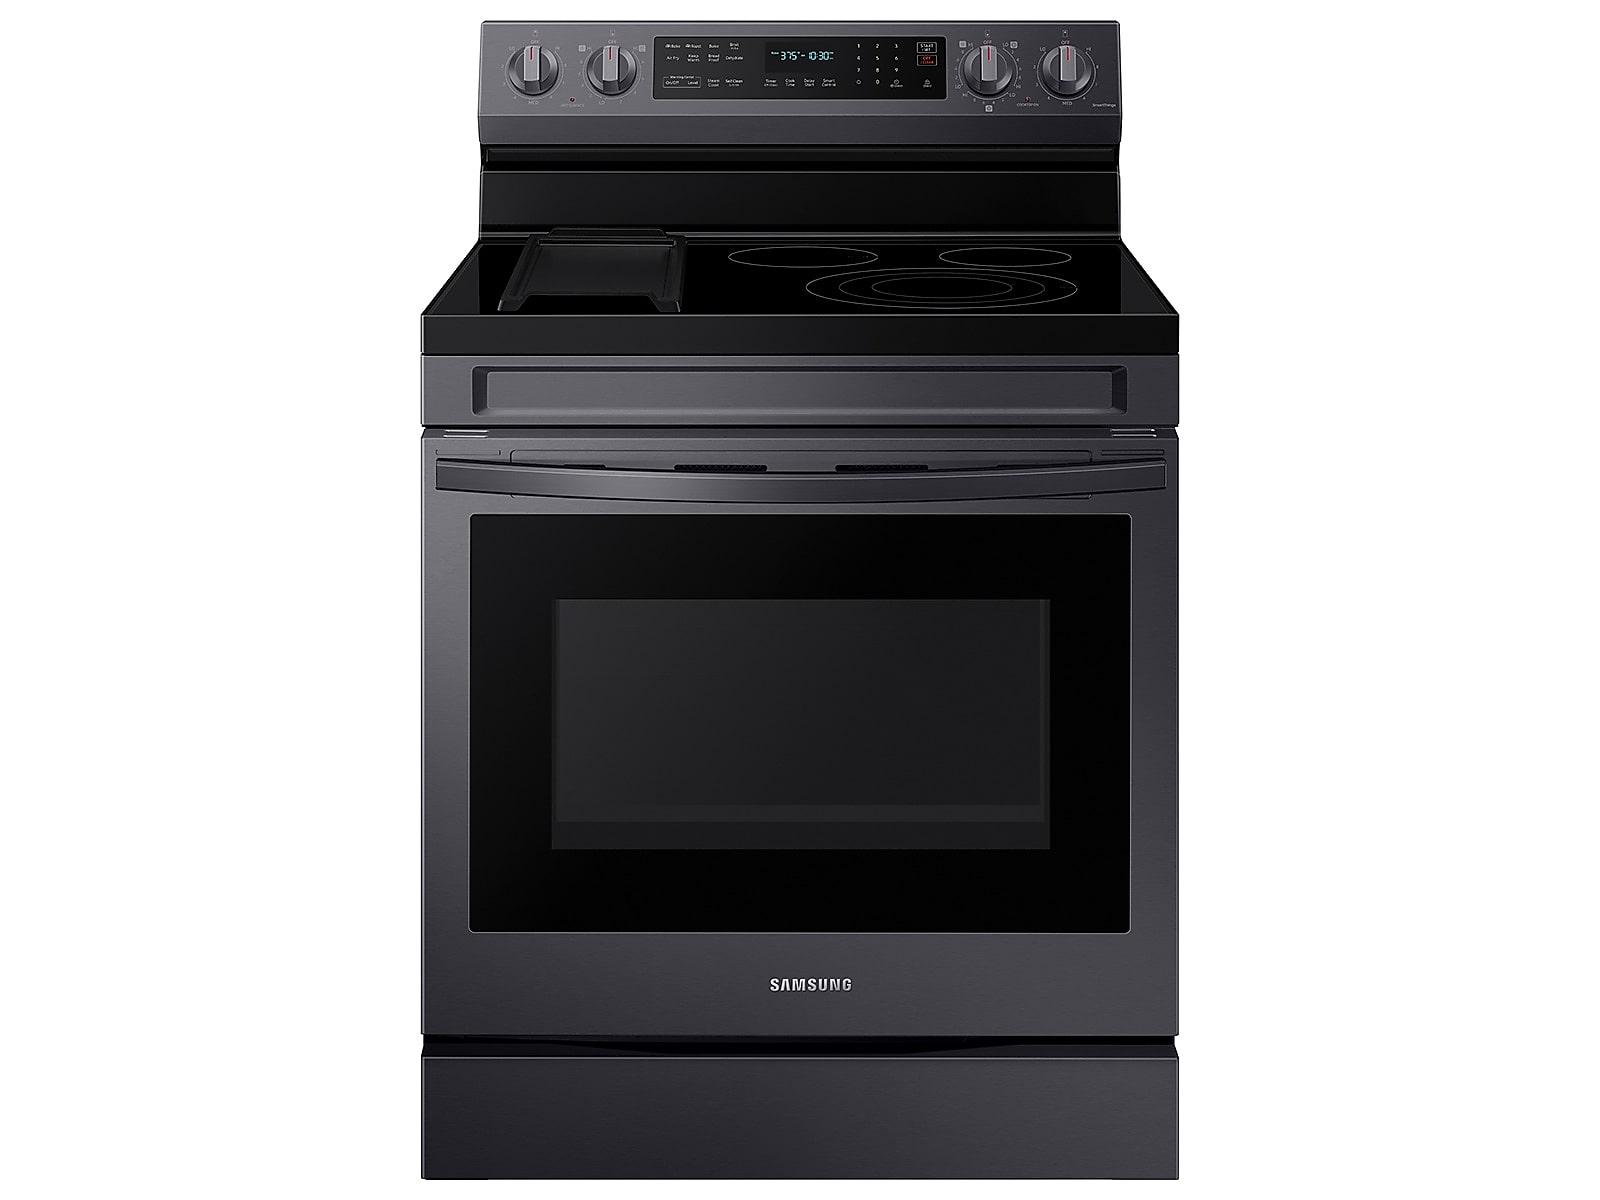 Samsung 6.3 cu. ft. Smart Freestanding Electric Range with No-Preheat Air Fry, Convection+ & Griddle in Black Stainless Steel(NE63A6711SG/AA)